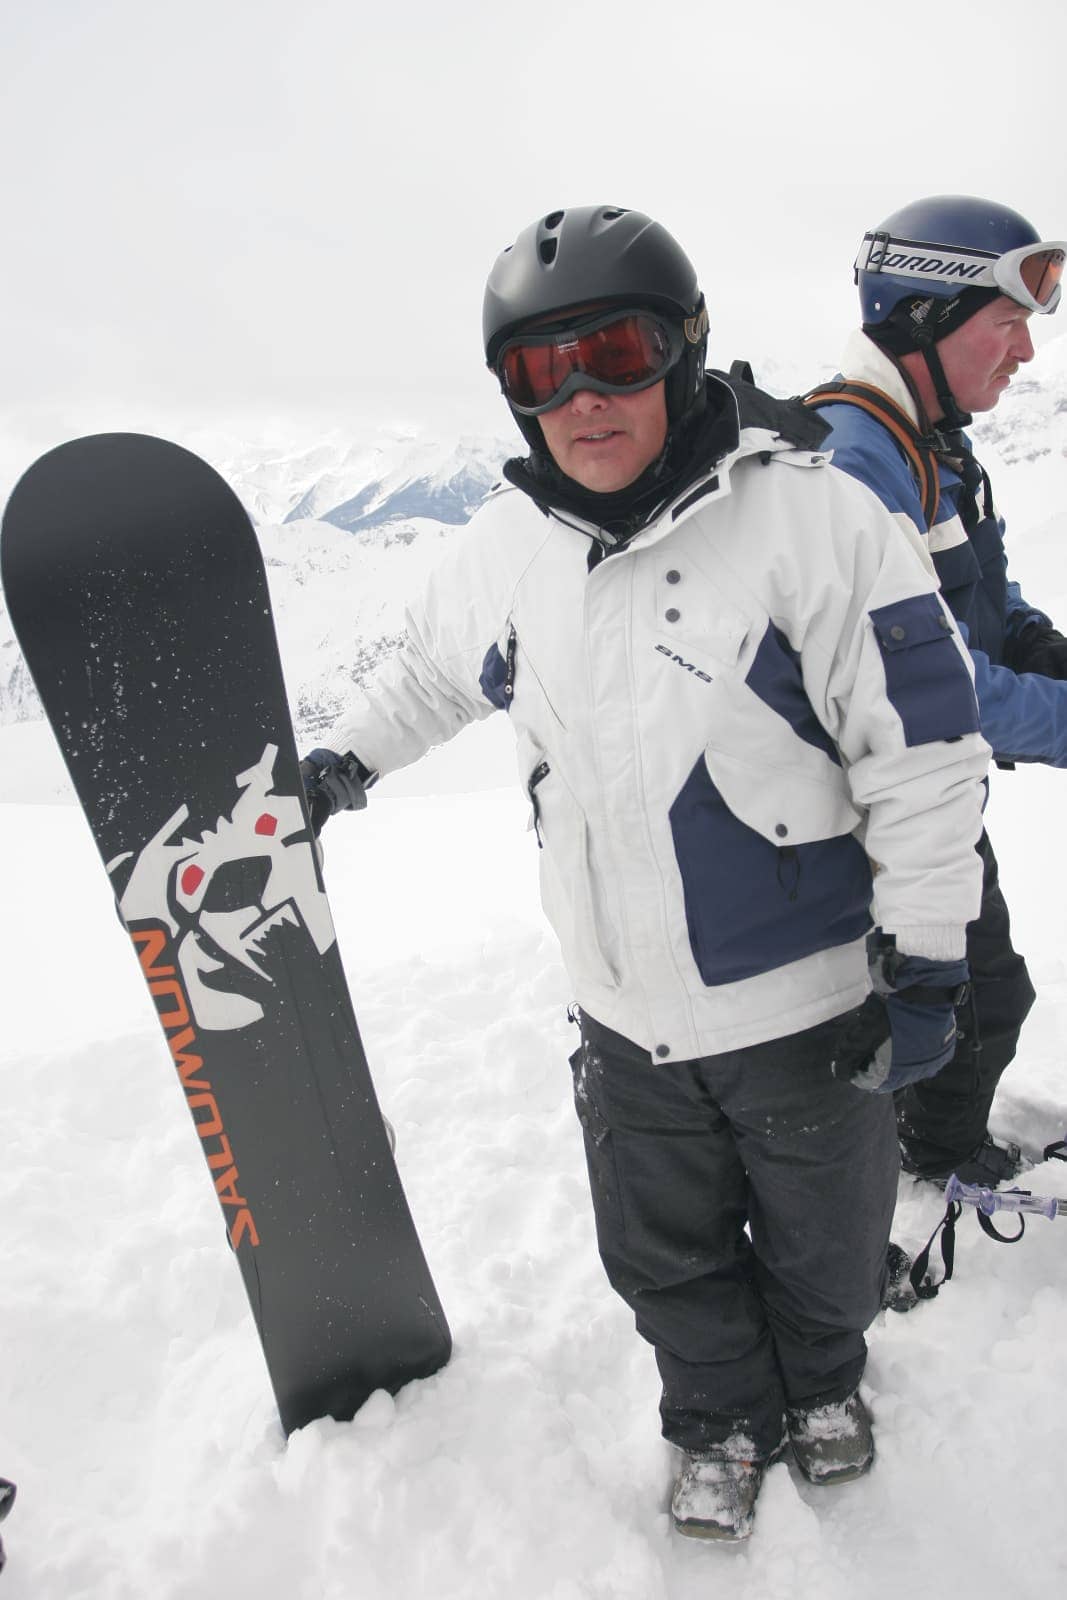 Man in white and blue jacket standing with snowboard